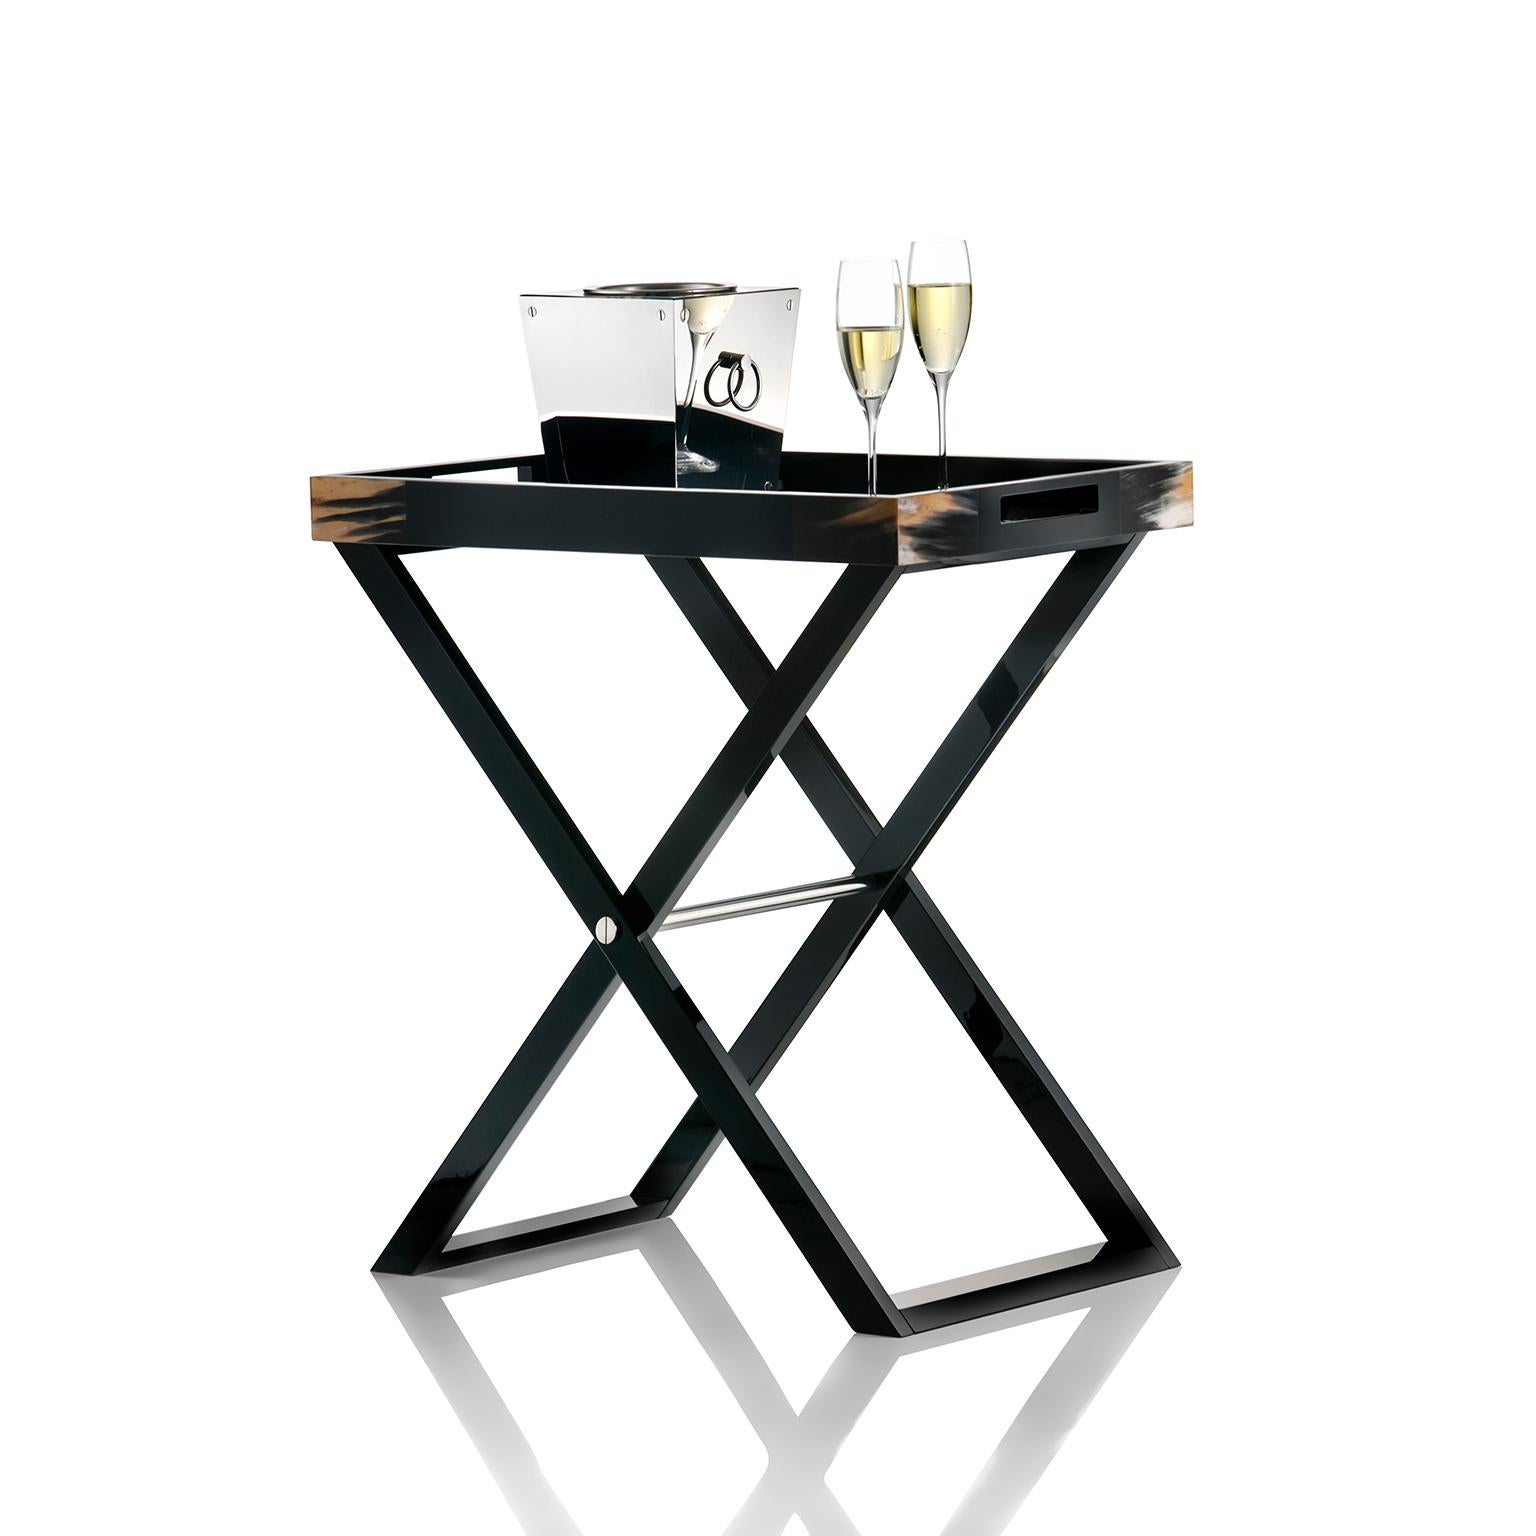 Beautiful texture and elegant appeal make our Elba butlers serving table a stunning addition to a contemporary interior. Unique accents in Corno Italiano bring a truly individual touch to the structure crafted of polished black lacquered wood, with